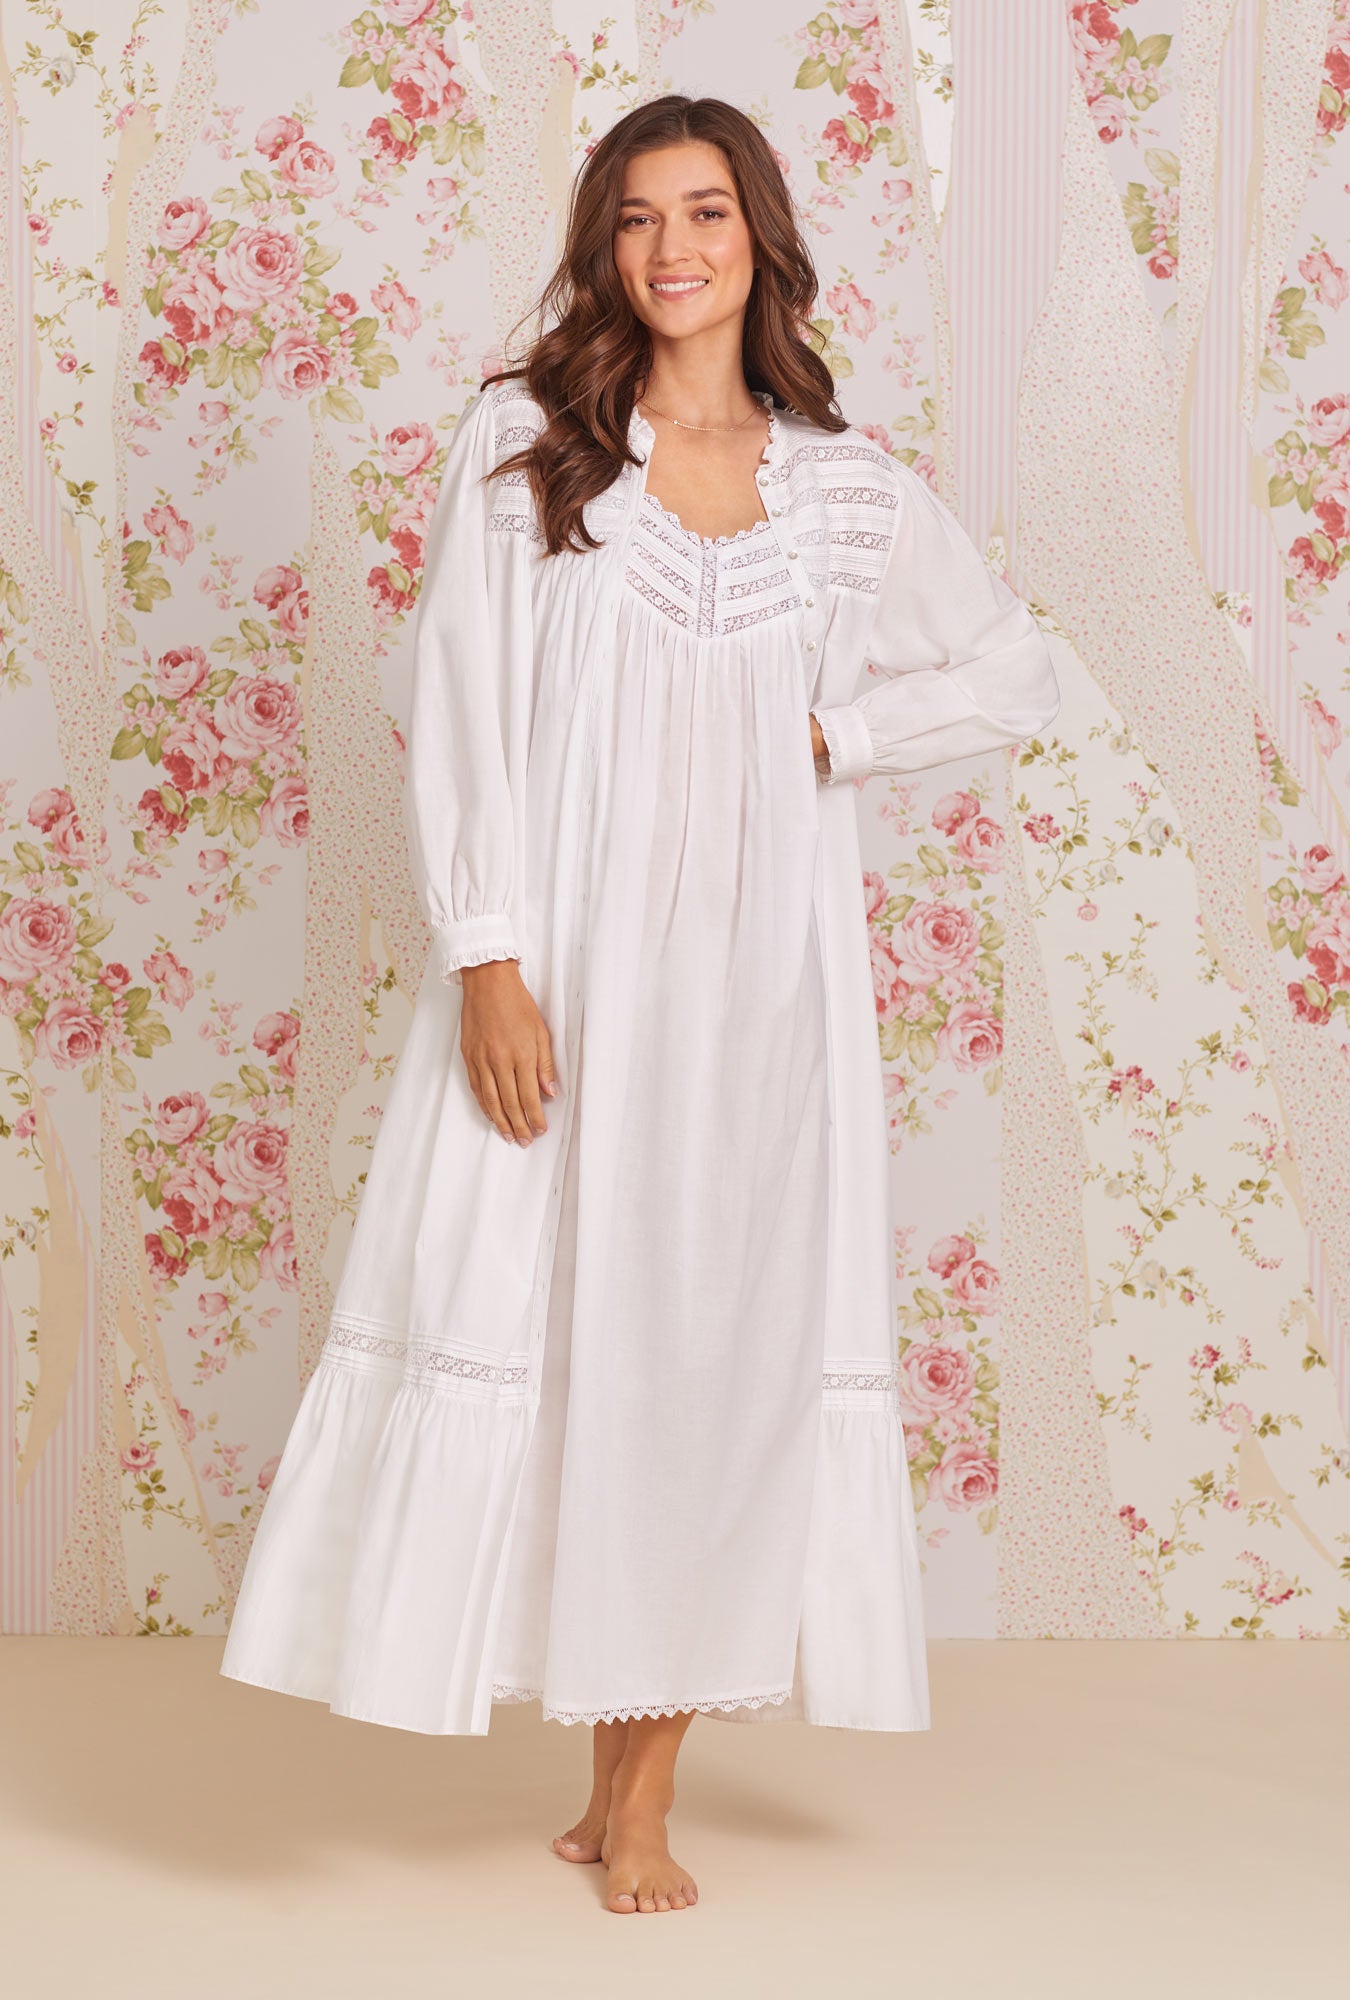 A lady wearing Cottage Dreams Nightgown